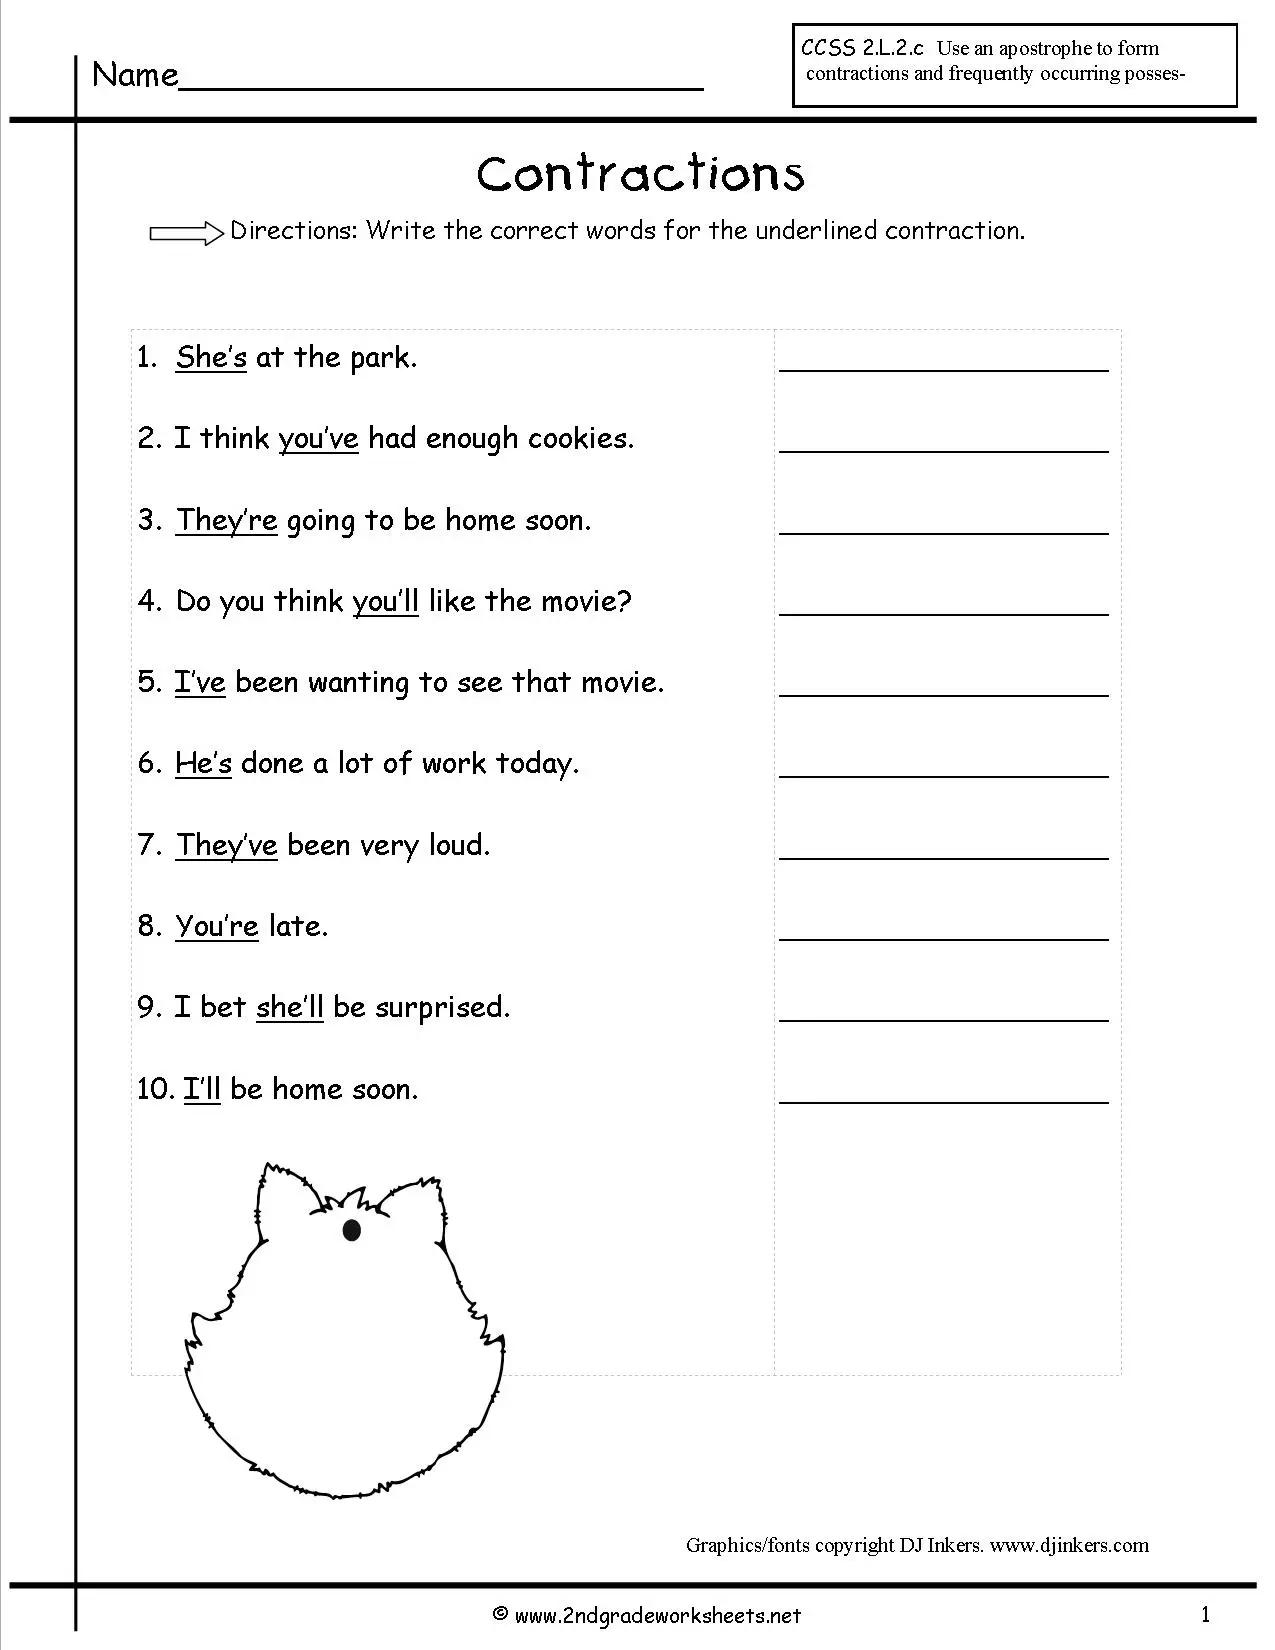 21 Contractions Worksheets for Improving Your Grammar - Kitty Baby Throughout Contractions Worksheet 2nd Grade